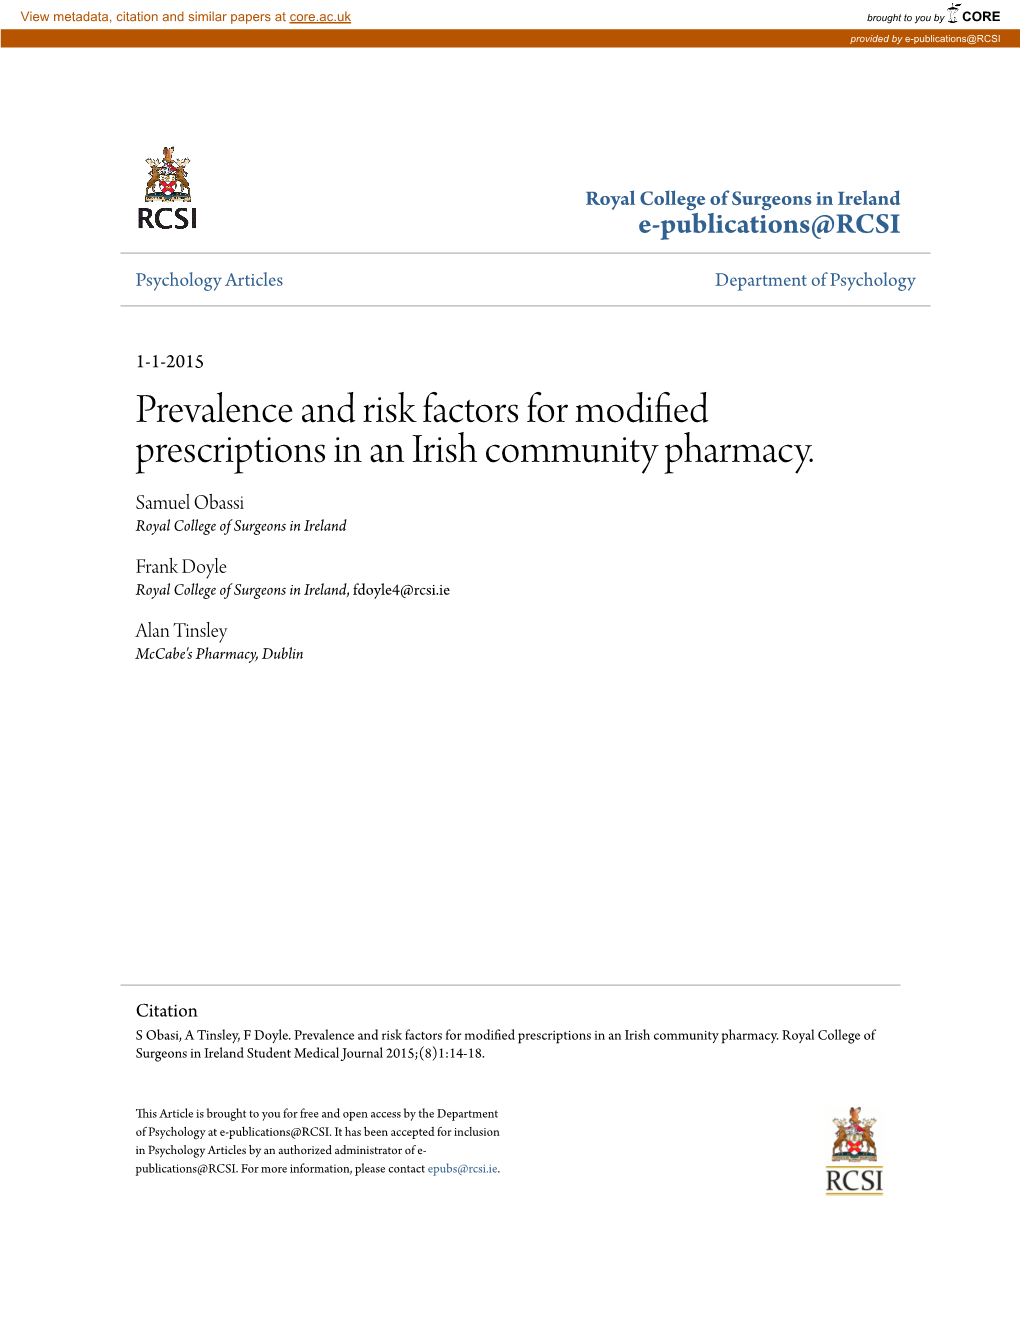 Prevalence and Risk Factors for Modified Prescriptions in an Irish Community Pharmacy